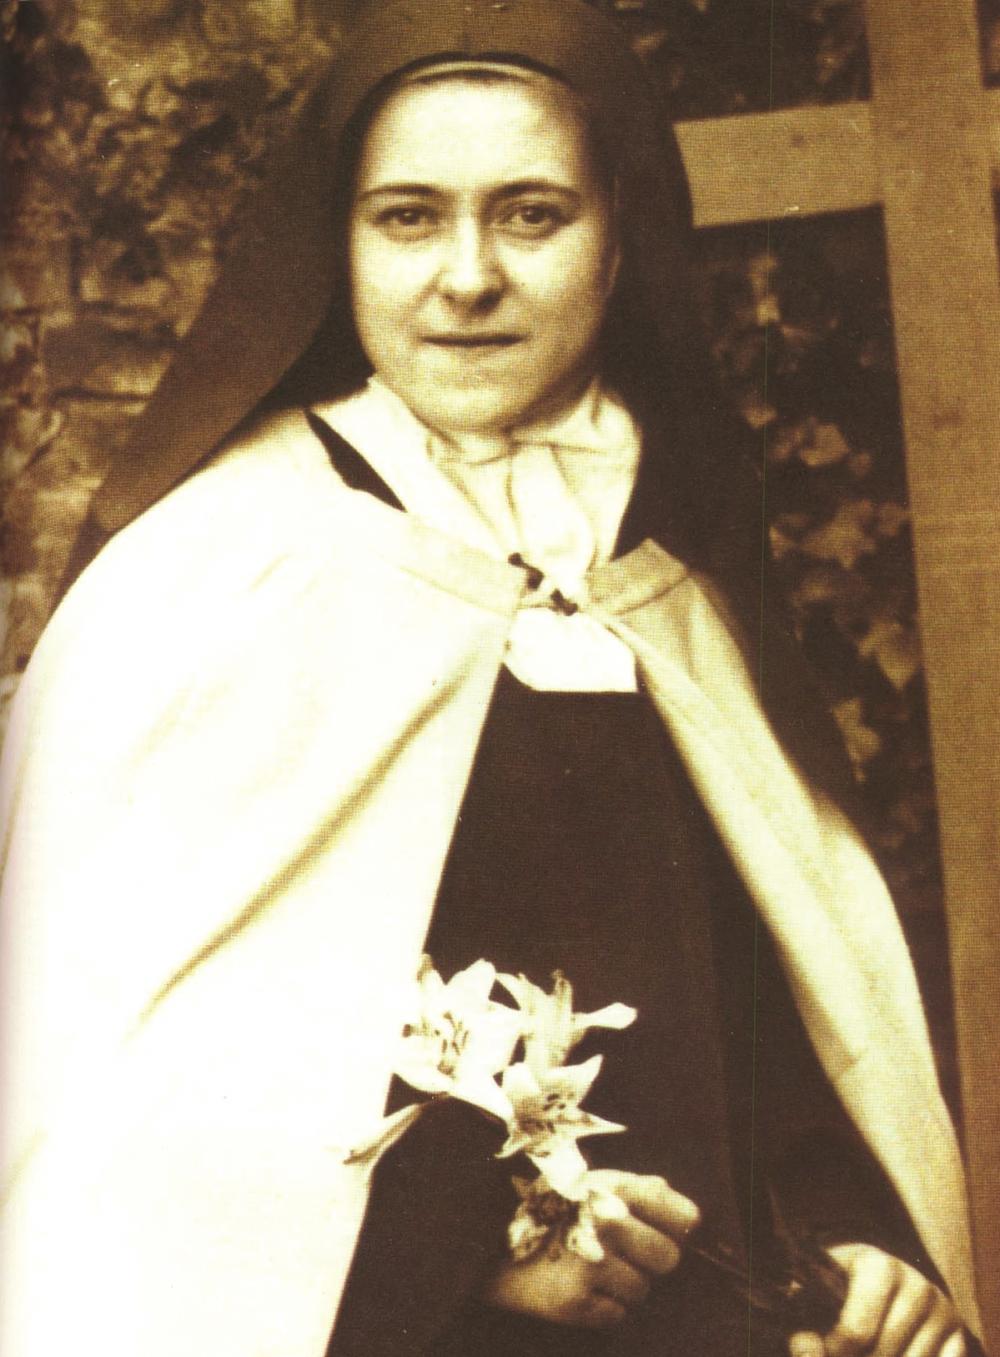 St. Therese of Lisieux and St. Stanislaus Kostka